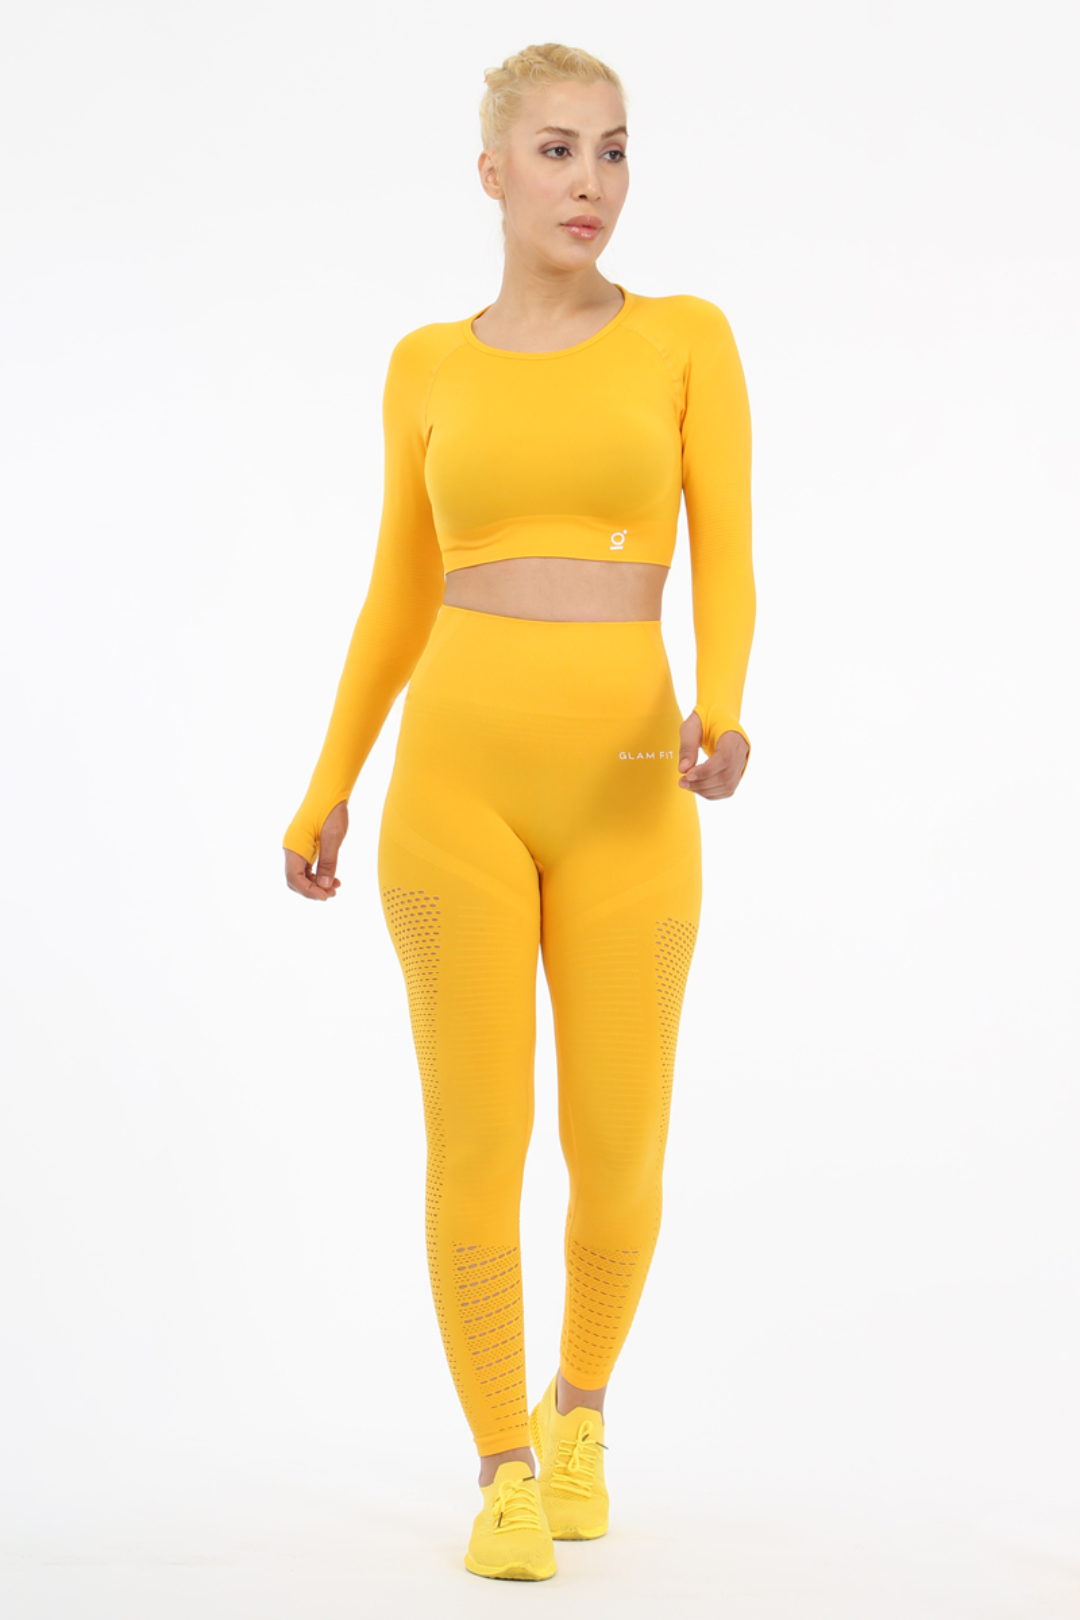 LL Yellow Yoga Outfit High Impact Seamless Sport Bra For Women Gym Active  Wear, Yoga Workout Vest, Sports Tops In Same Style As LULU Lemon From  Hadis, $18.23